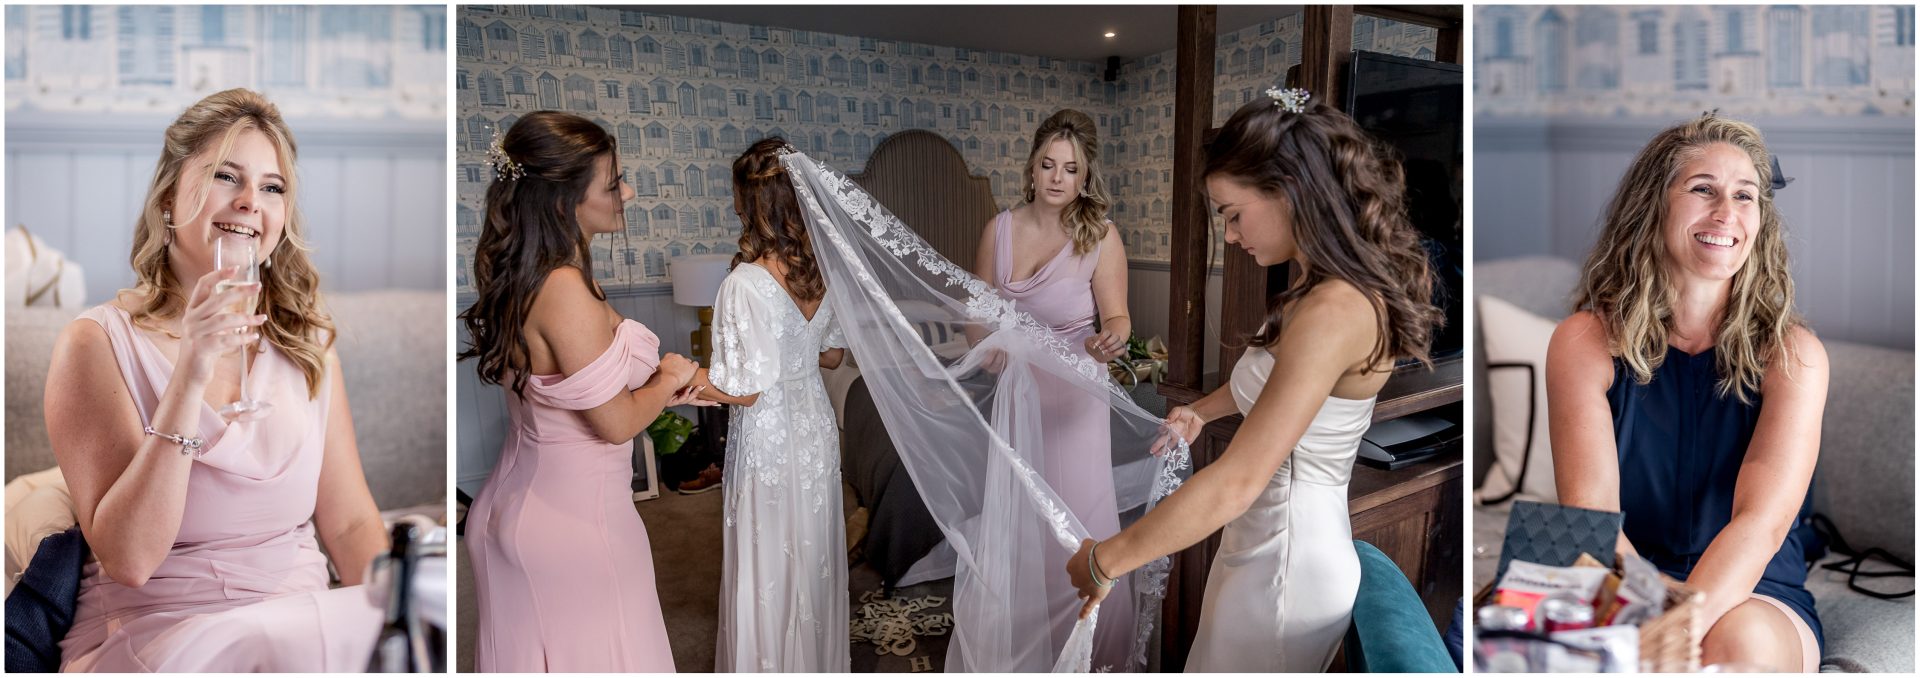 Bridesmaids help the bride to get ready